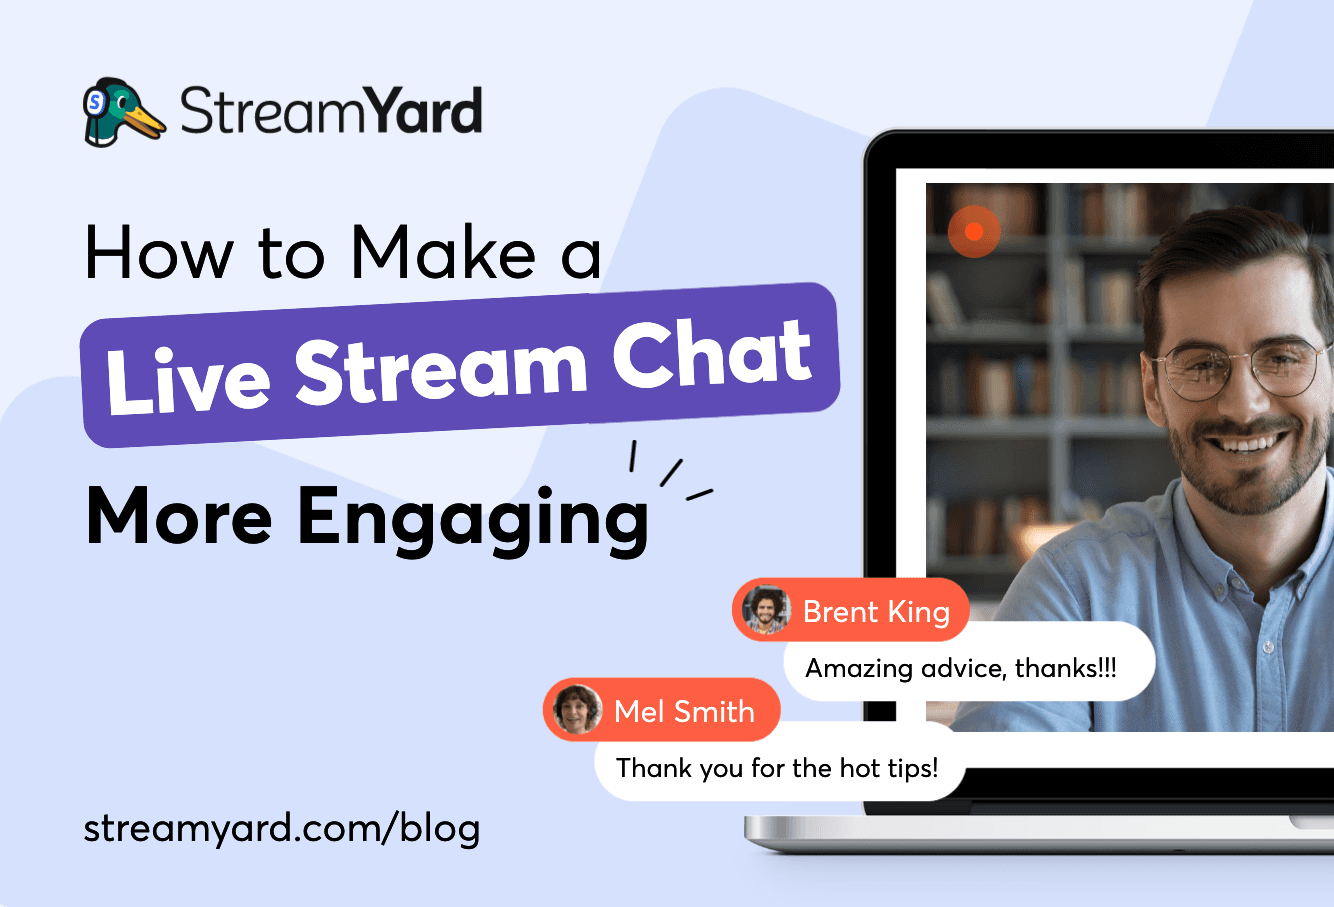 Tap into the human element of your live streams by learning these basic tips on making your live stream chat more engaging.